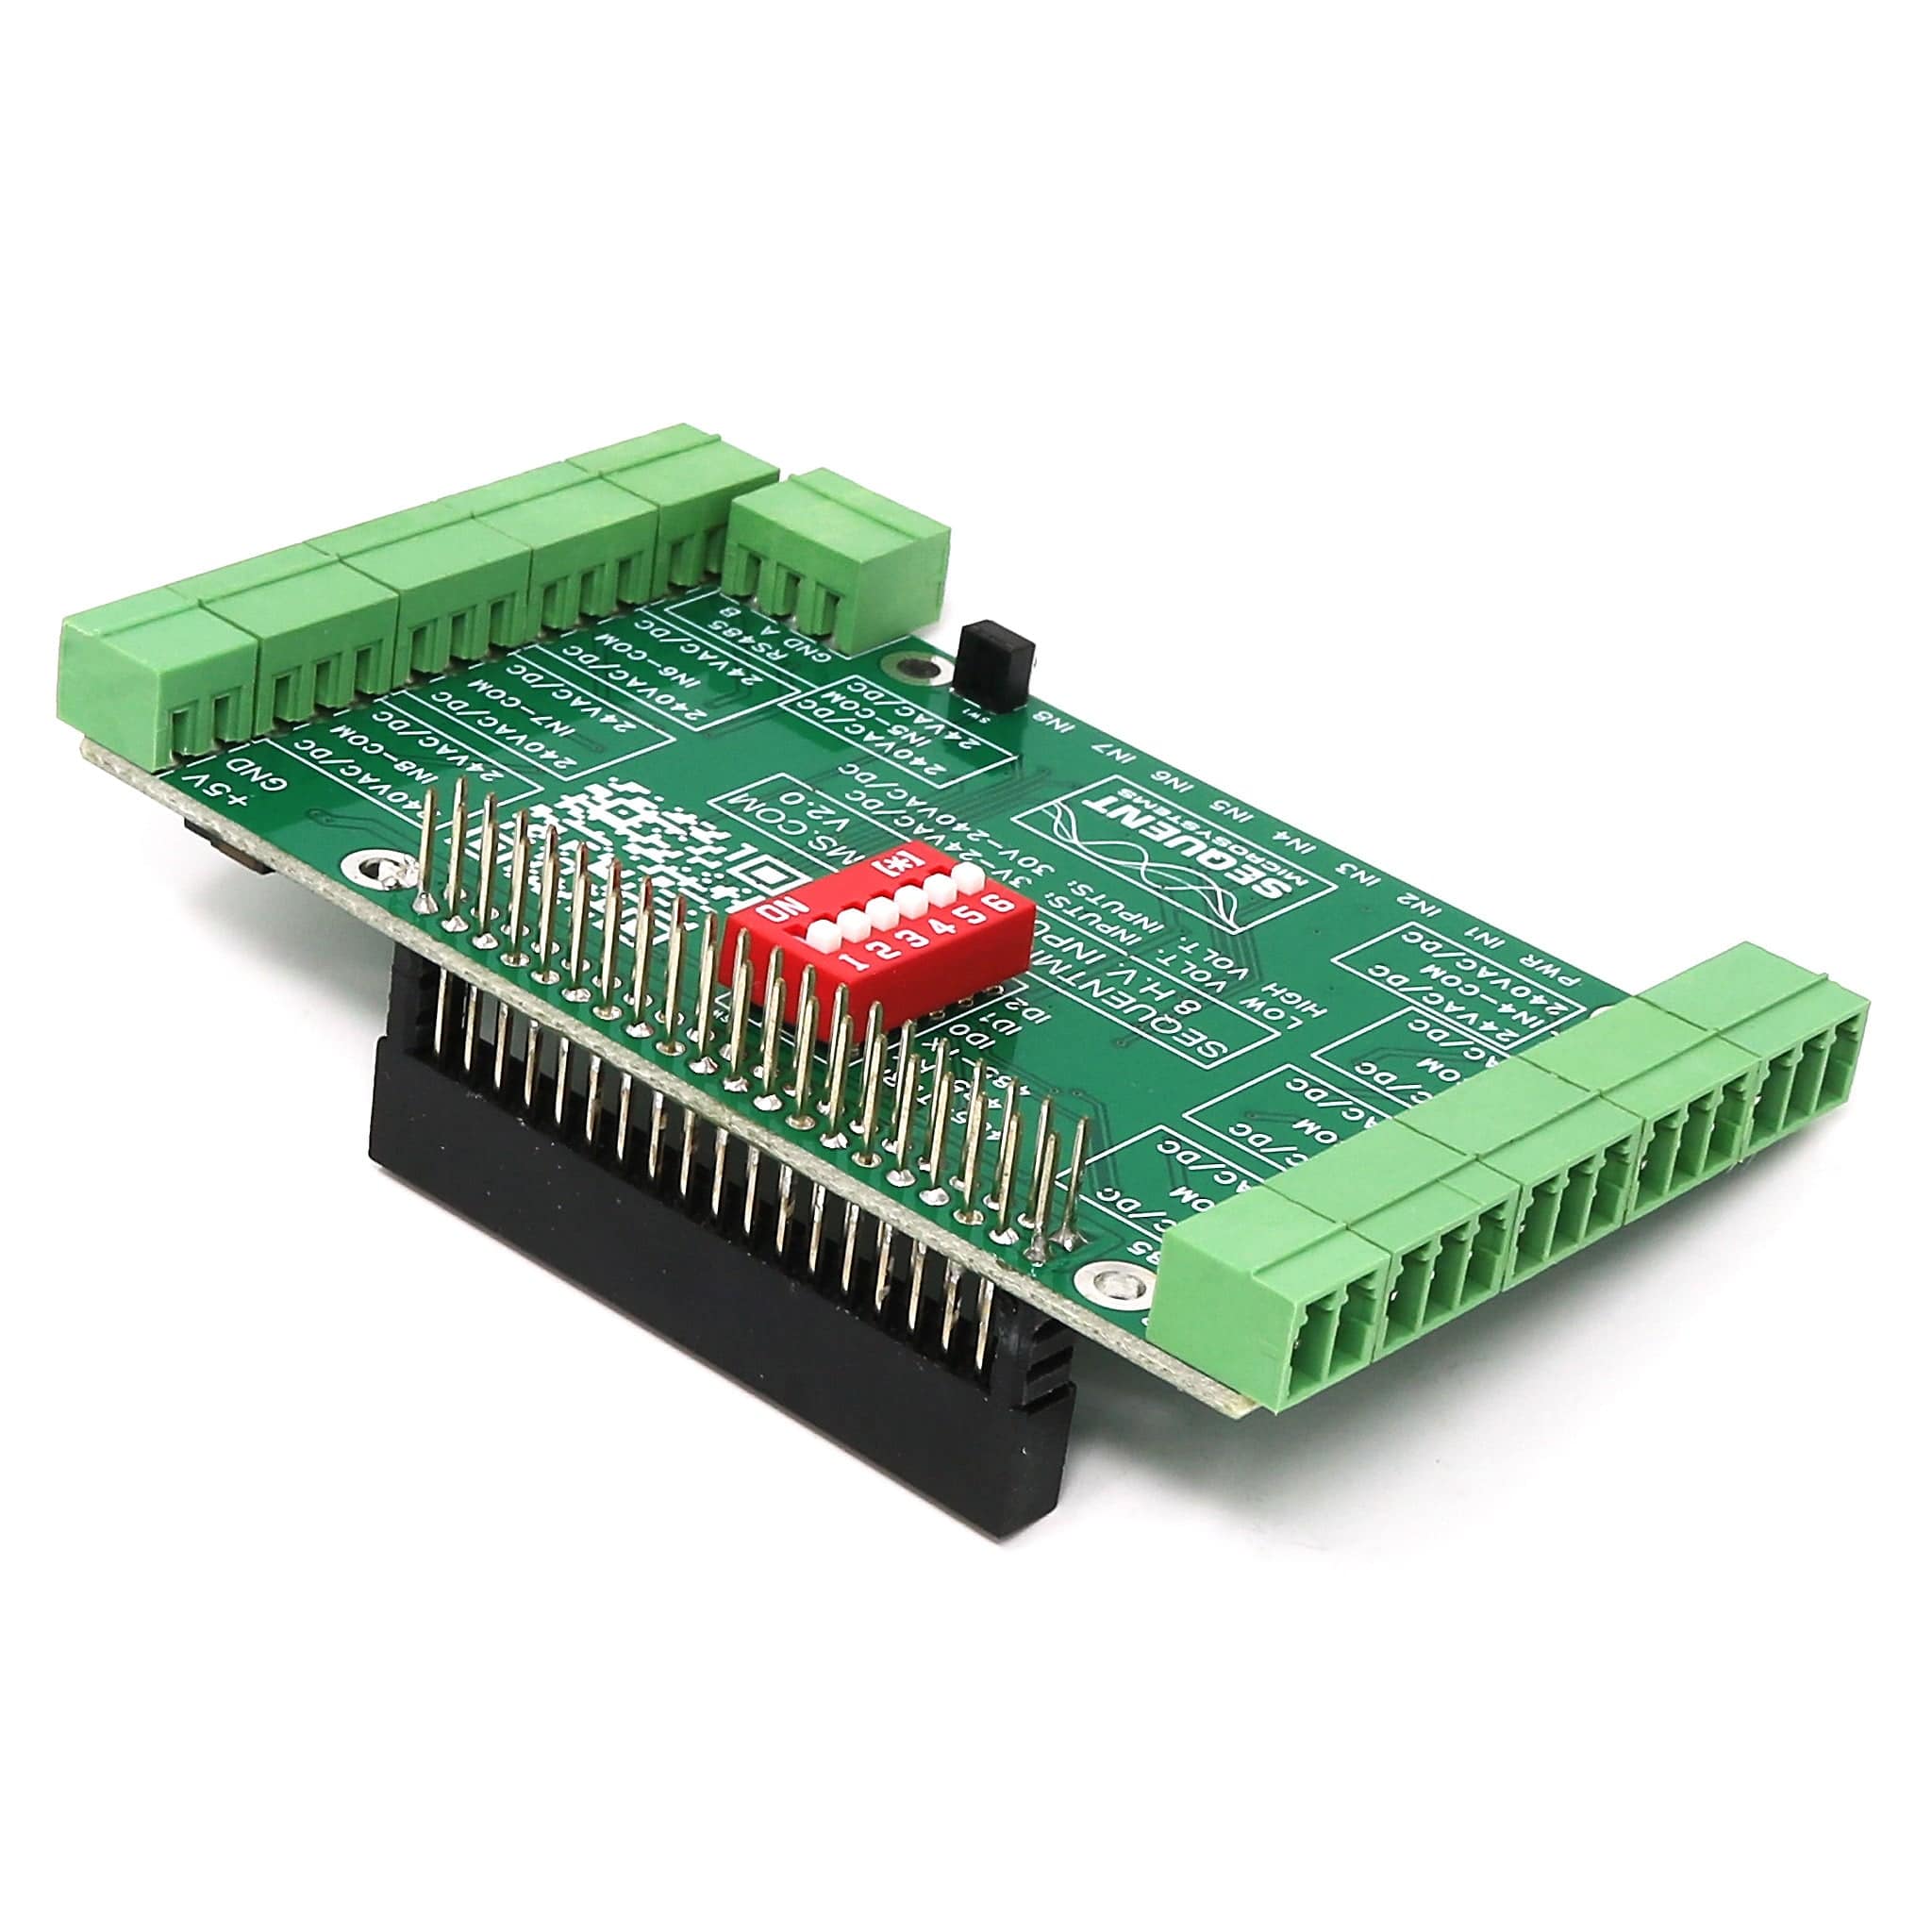 8 HV Digital Inputs 8-Layer Stackable HAT for Raspberry Pi | The